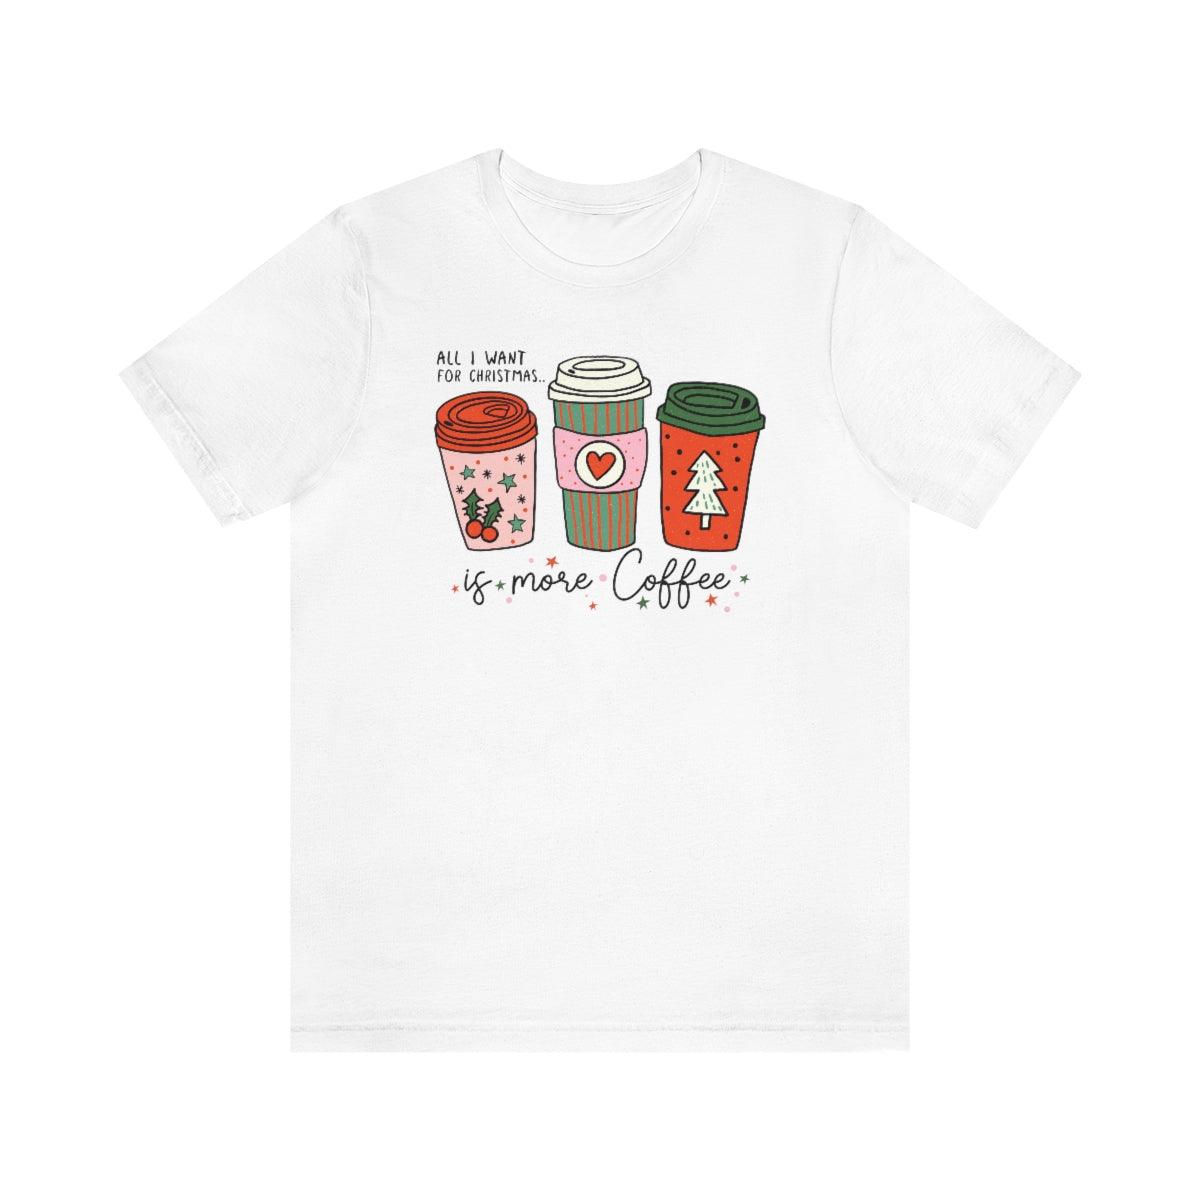 All I Want For Christmas Is More Coffee Christmas Shirt Short Sleeve Tee - Crystal Rose Design Co.